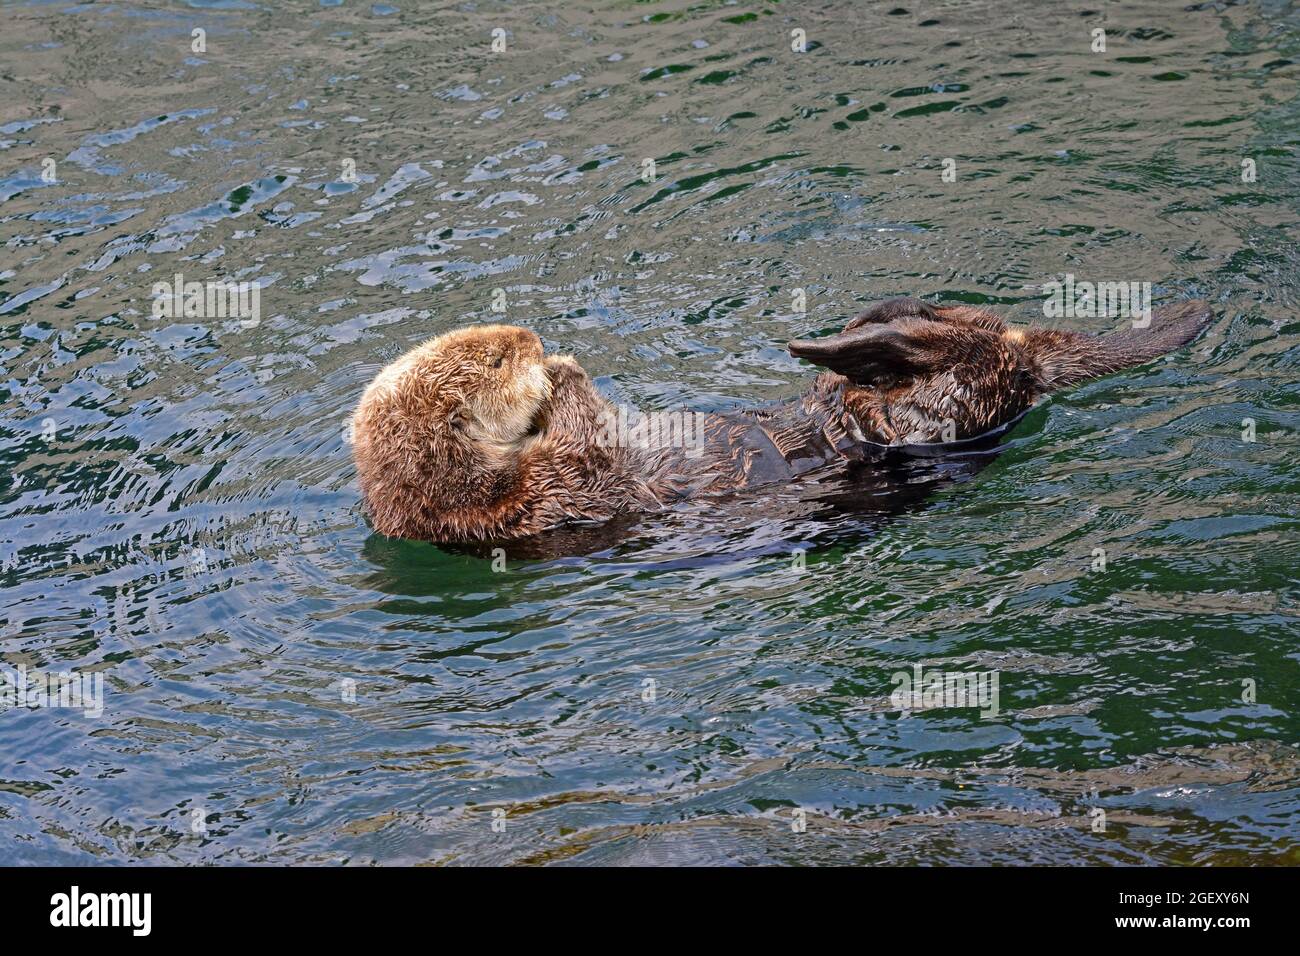 Sea otter in  the pacific ocean Stock Photo